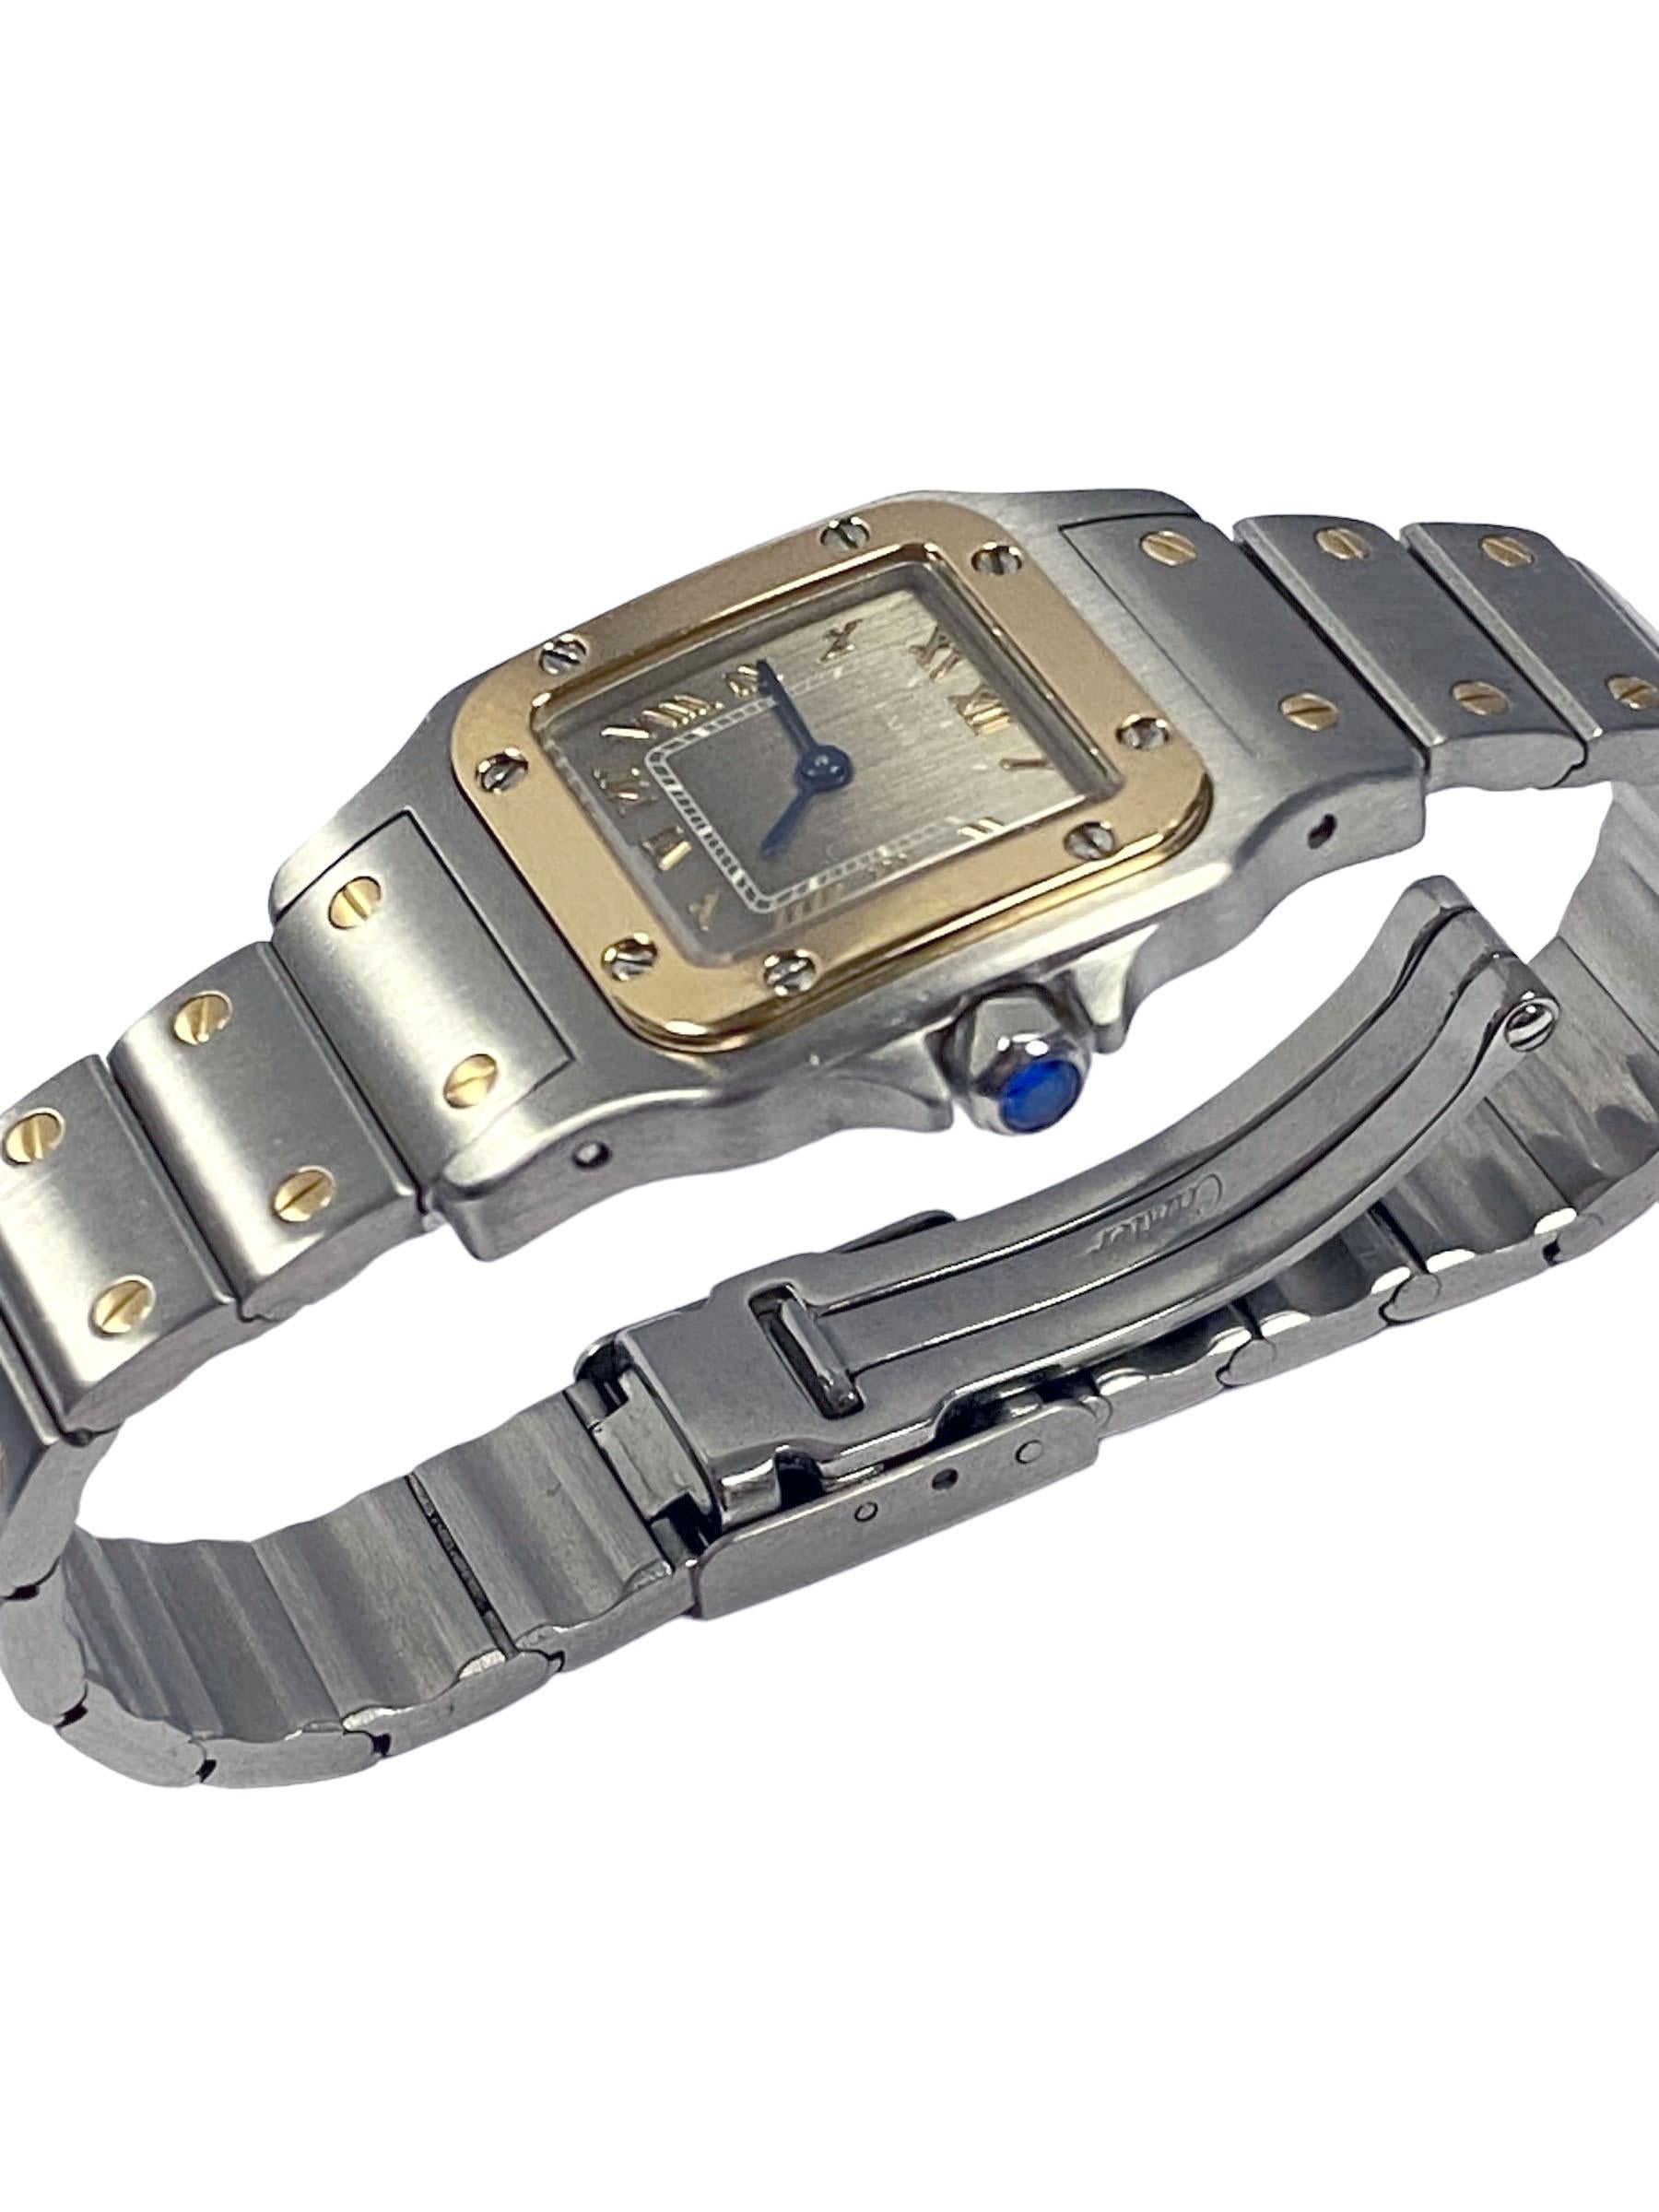 Circa 2005 Cartier Santos Galbee Ladies Wrist Watch, 34 X 24 MM Stainless Steel case with 18K Yellow Gold Bezel. Quartz movement, Silver Dial with raised Gold markers, sapphire crown. 1/2 inch wide Stainless Steel and 18K Yellow Gold Santos Bracelet